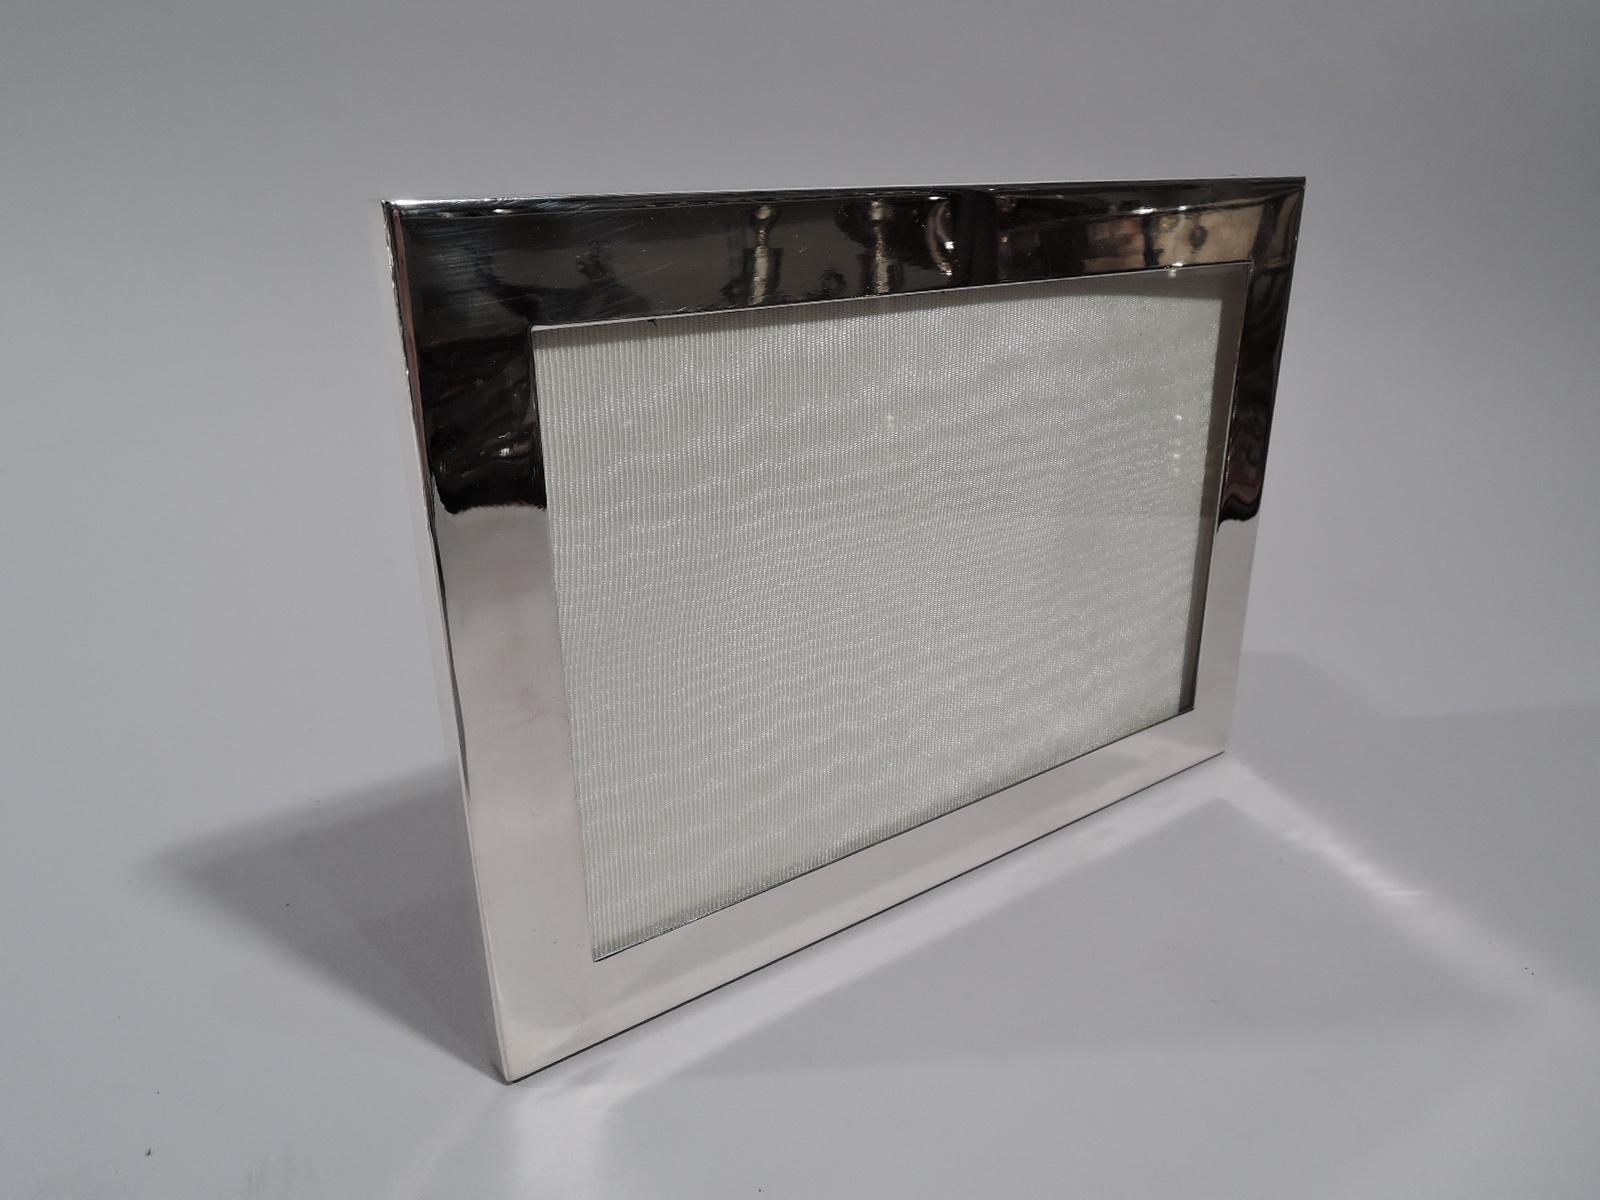 Modern sterling silver picture frame. Retailed by Tiffany & Co. in New York. Rectangular window in flat surround with glass, silk lining, and velvet back and hinged support. For portrait (vertical) or landscape (horizontal) display. Marked “Tiffany